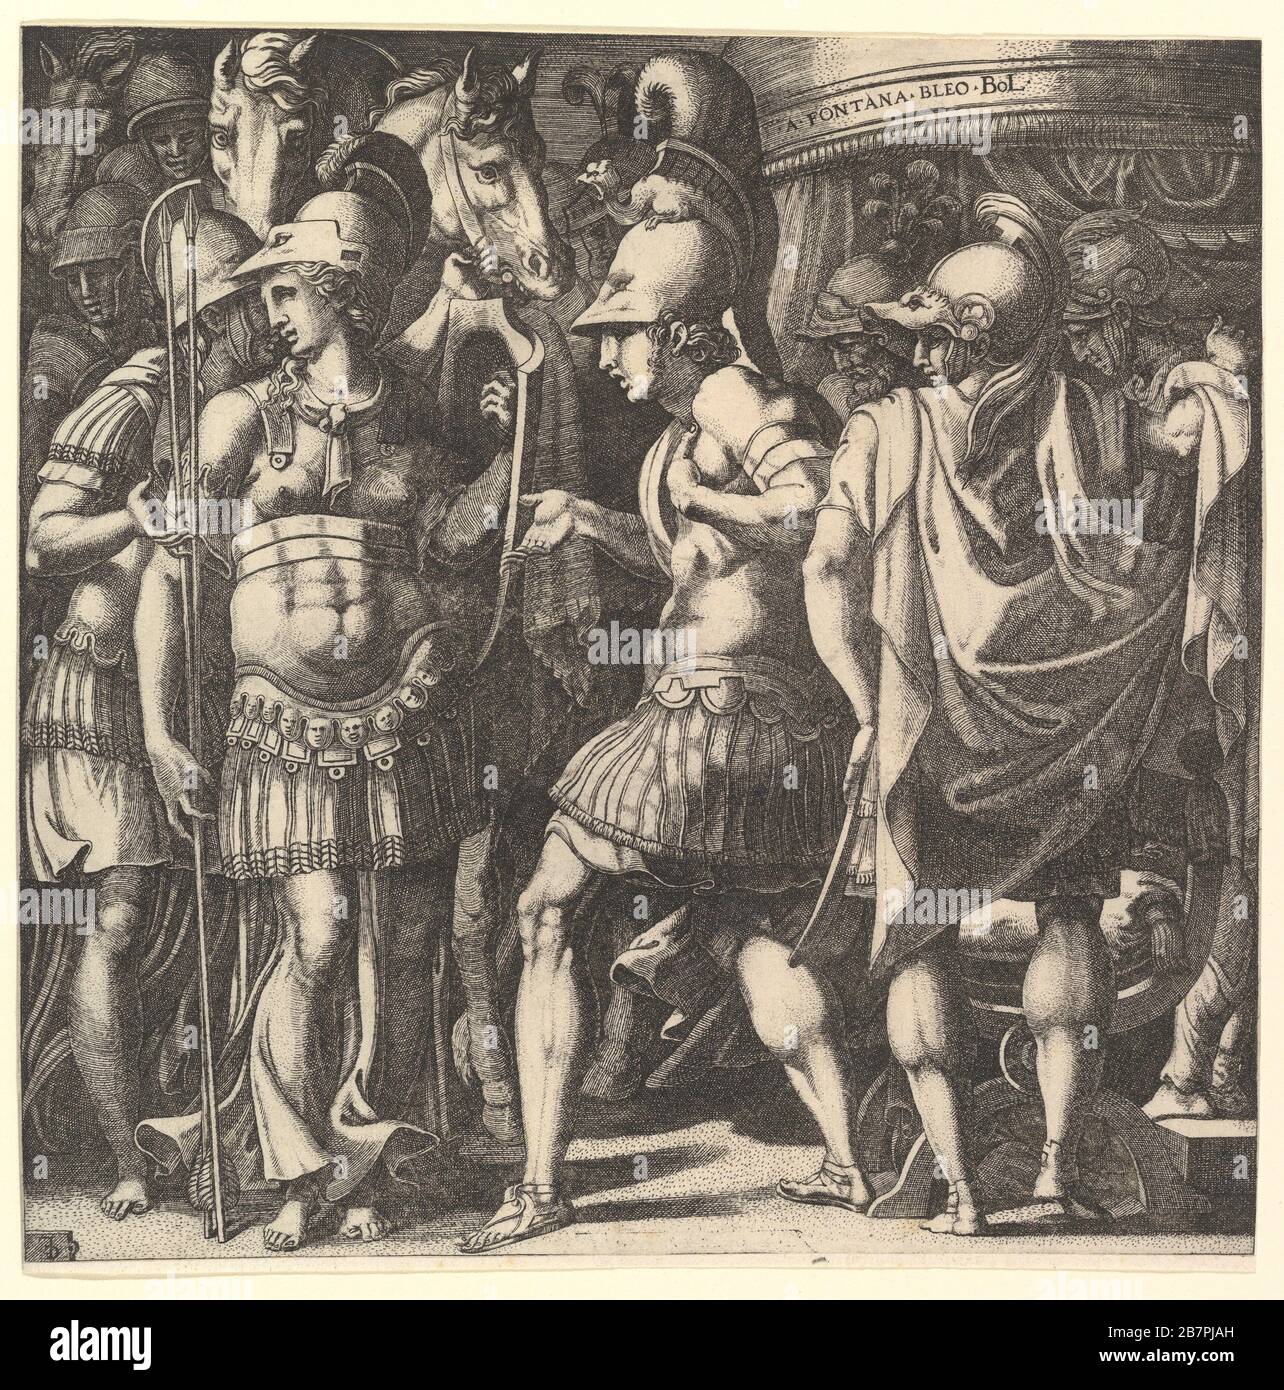 Alexander welcoming Thalestris and the Amazons, mid-16th century. Stock Photo